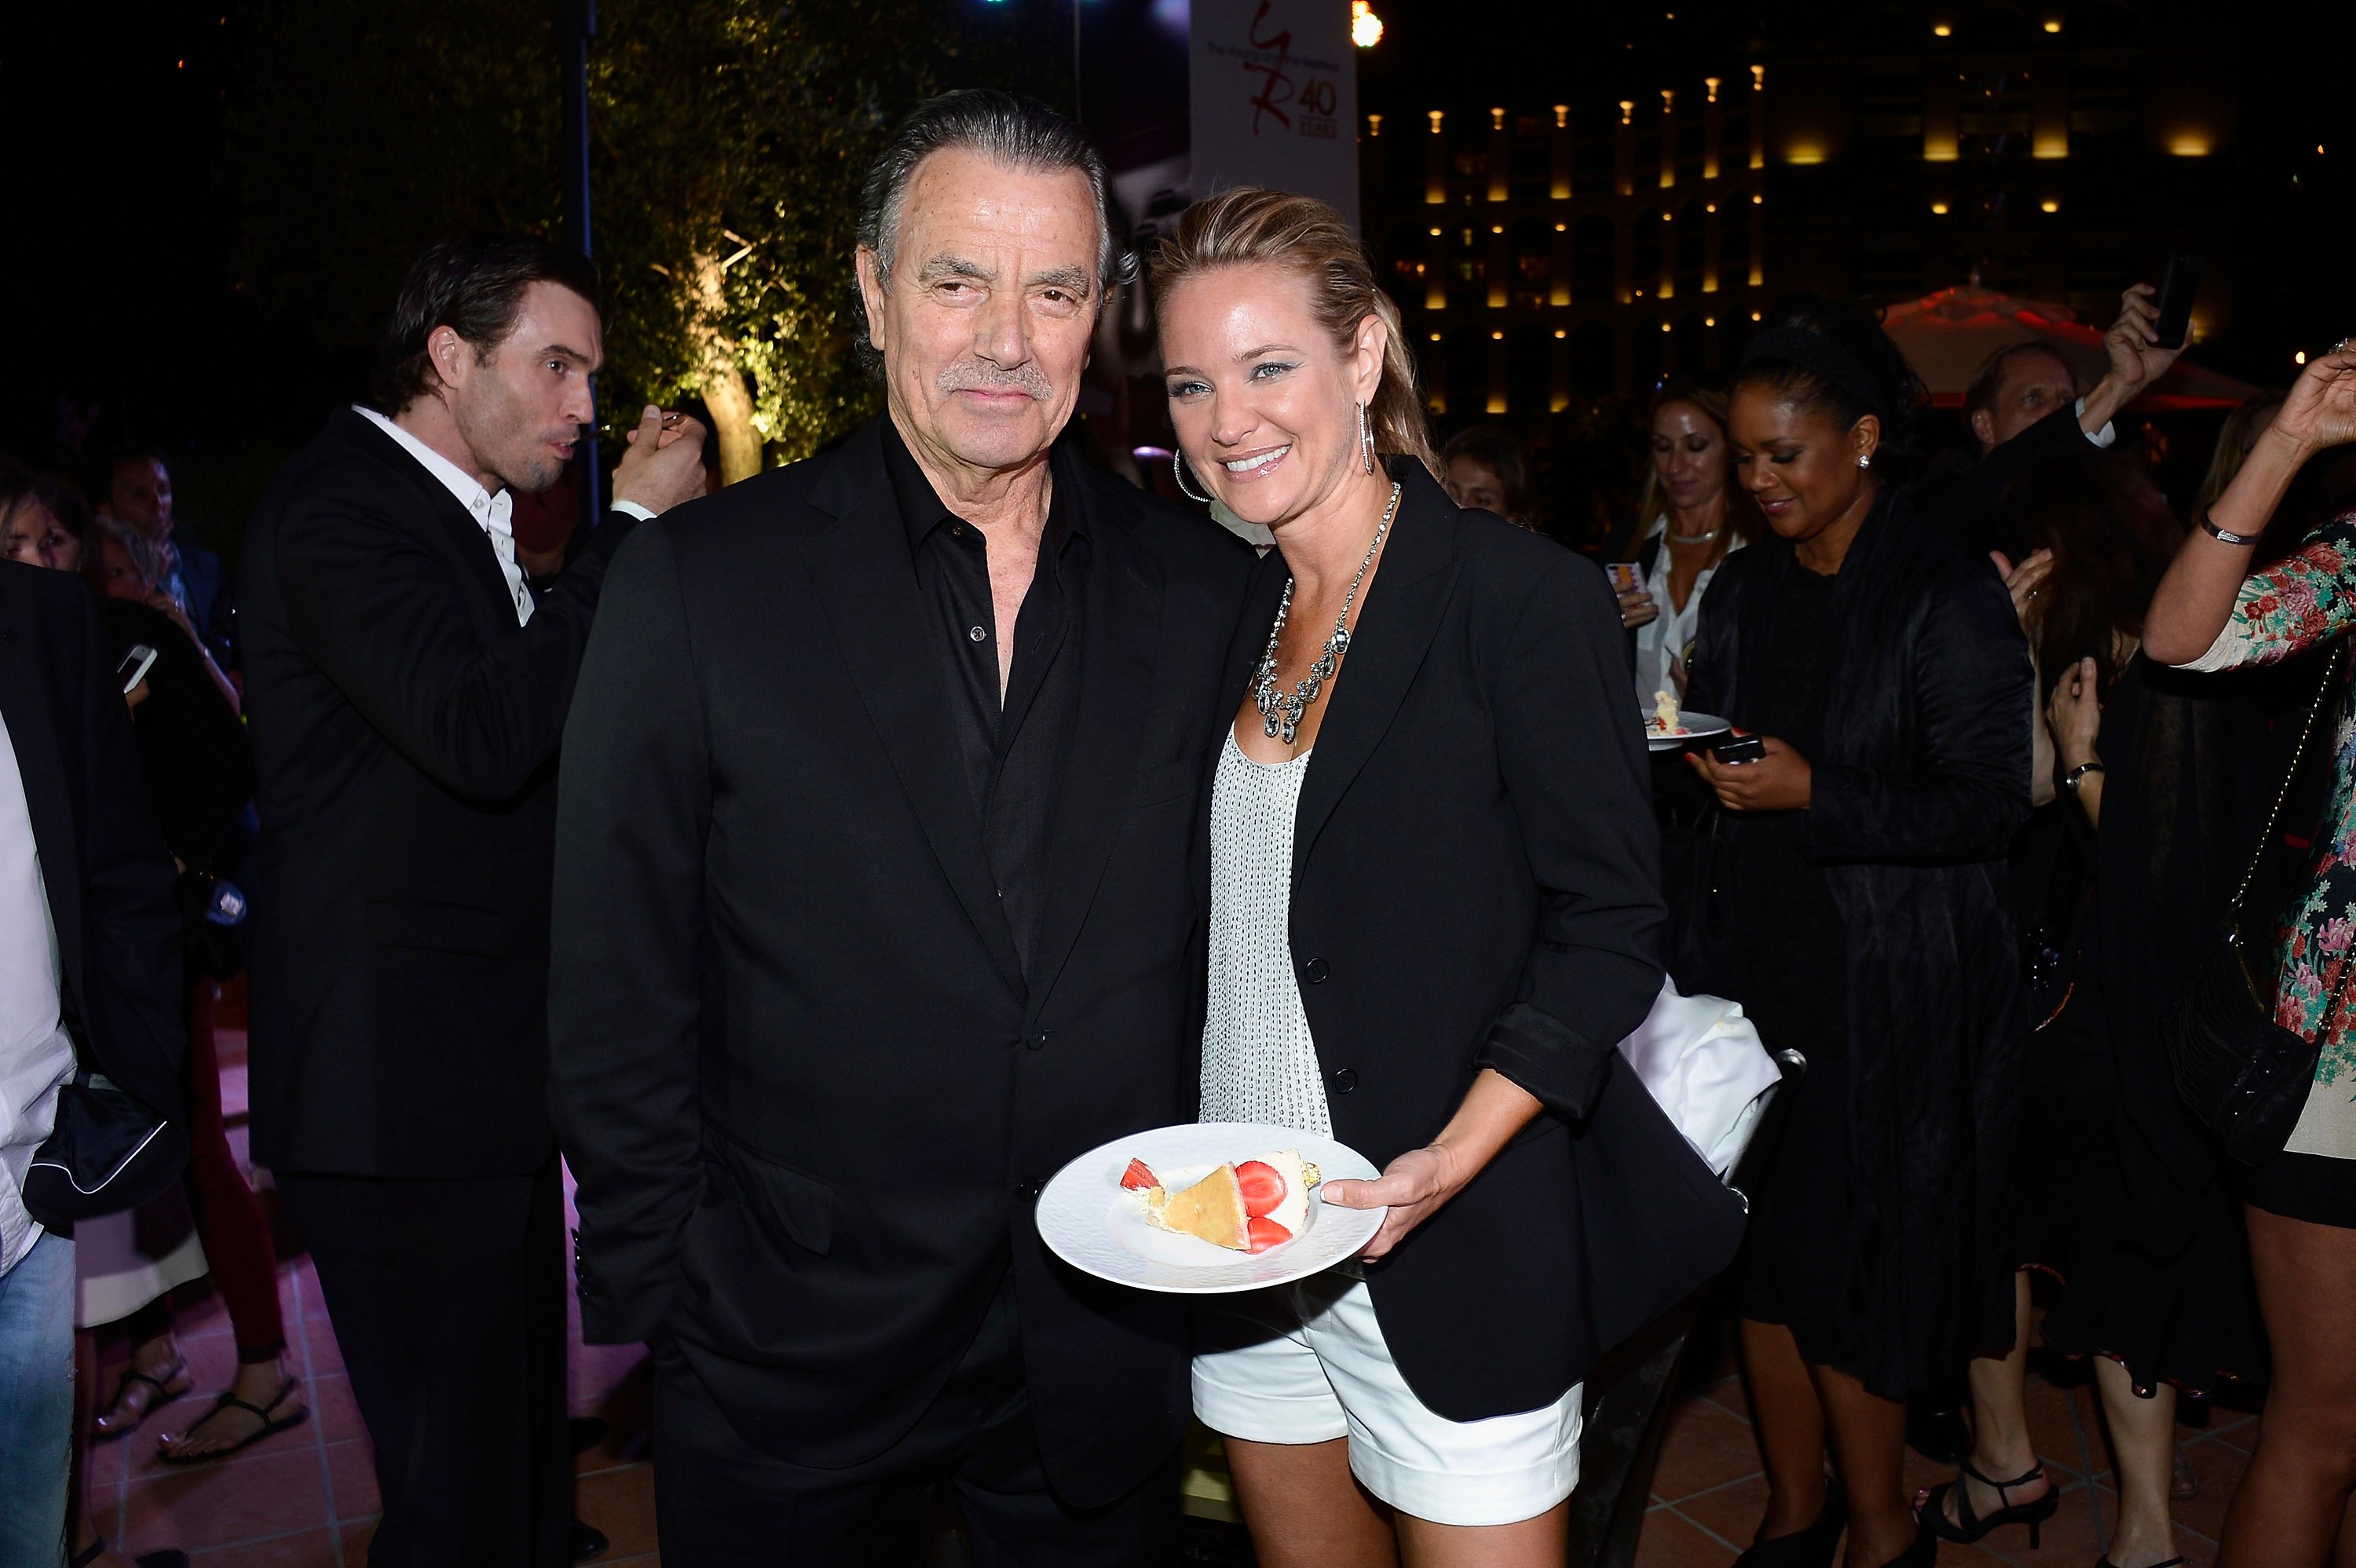 'The Young and the Restless' actor Eric Braeden in a black suit, and Sharon Case in a white outfit with black blazer.